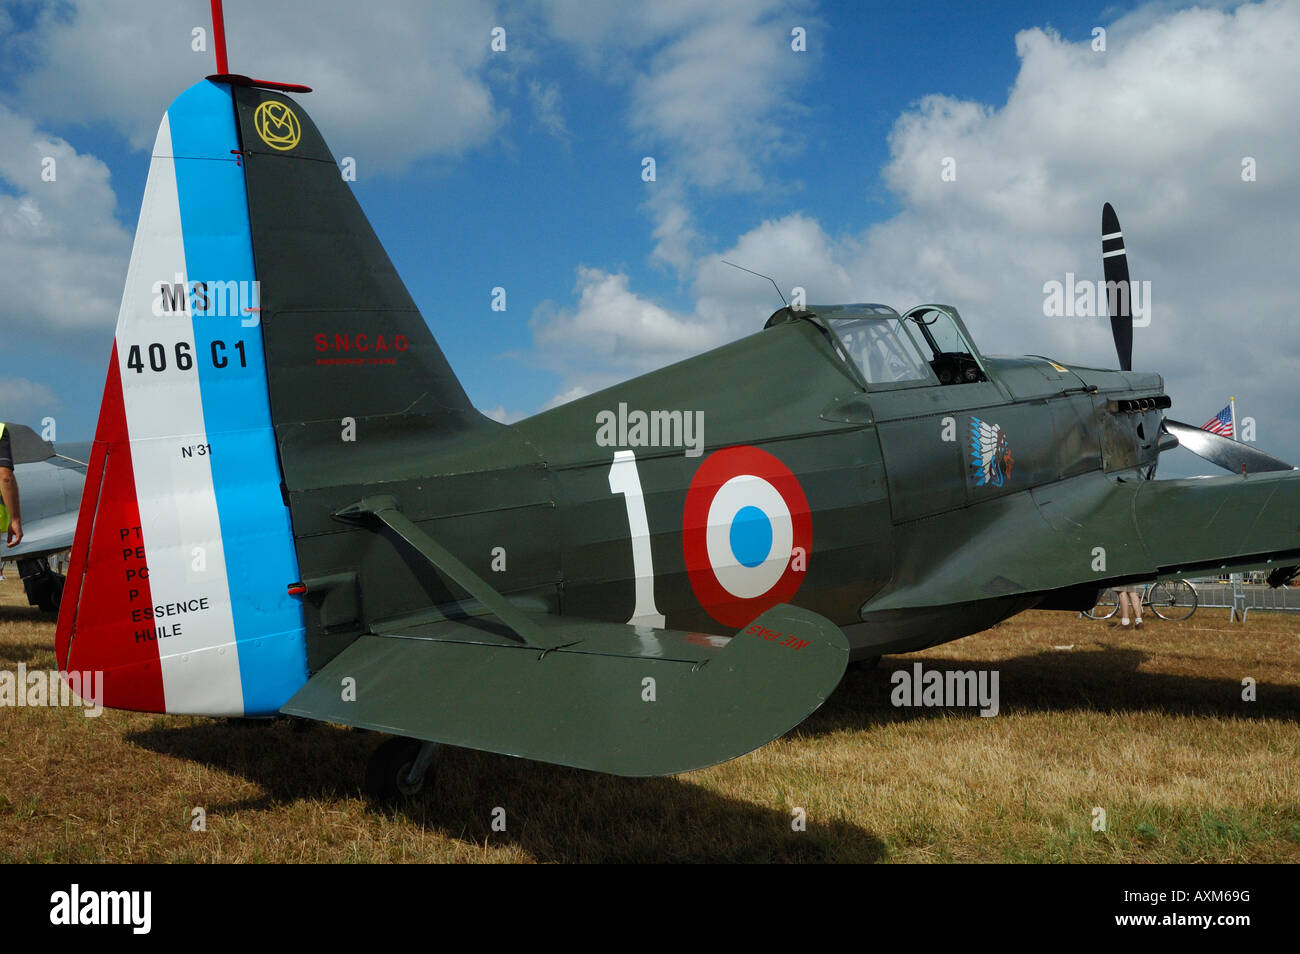 Morane Saulnier MS-406 (D-3801), rare and historic WWII french fighter plane Stock Photo